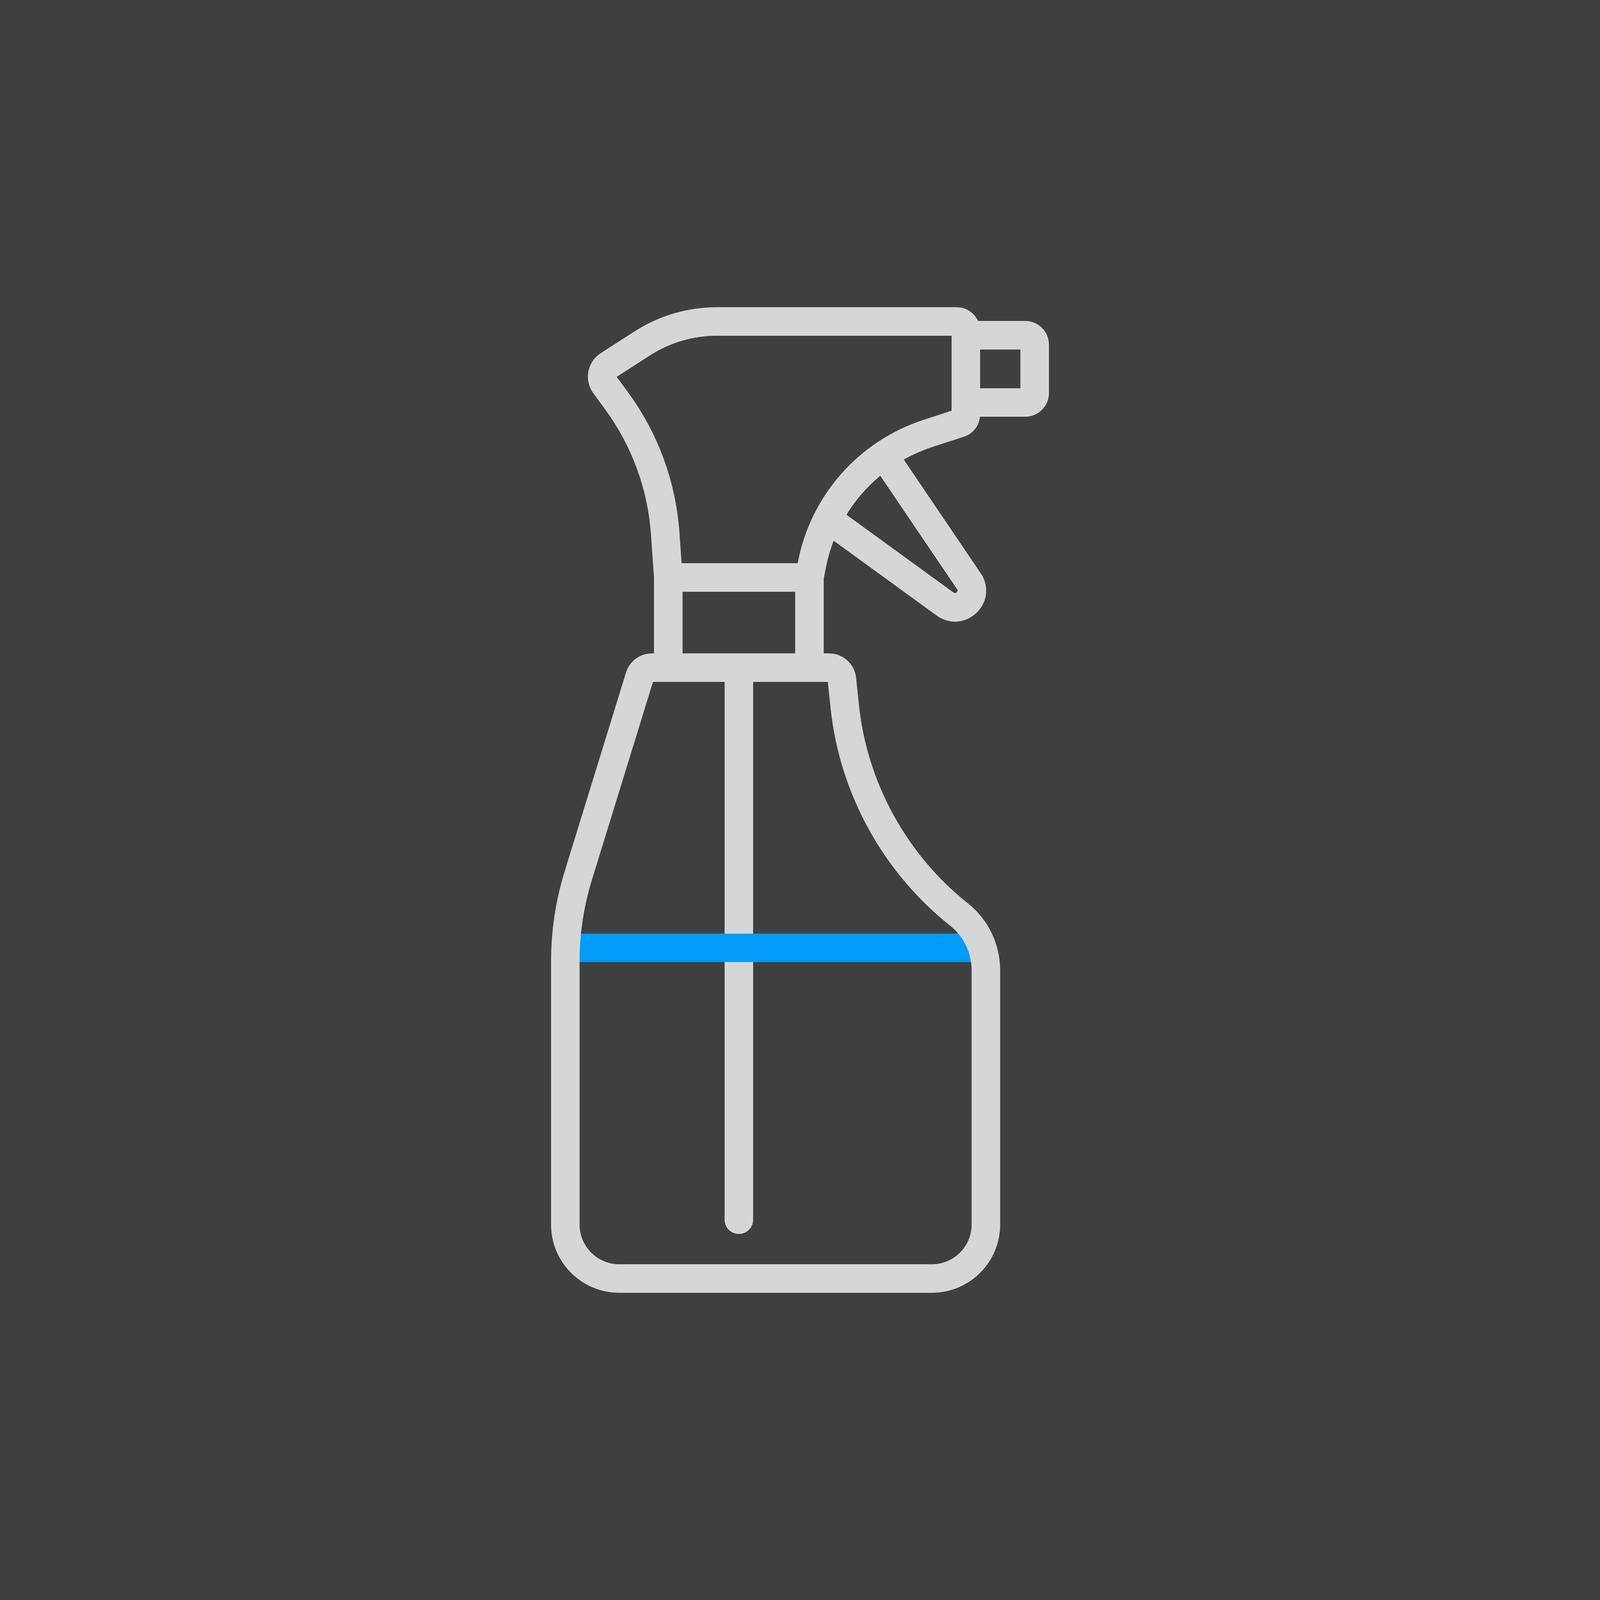 Cleaning spray bottle vector icon. Coronavirus sign by nosik